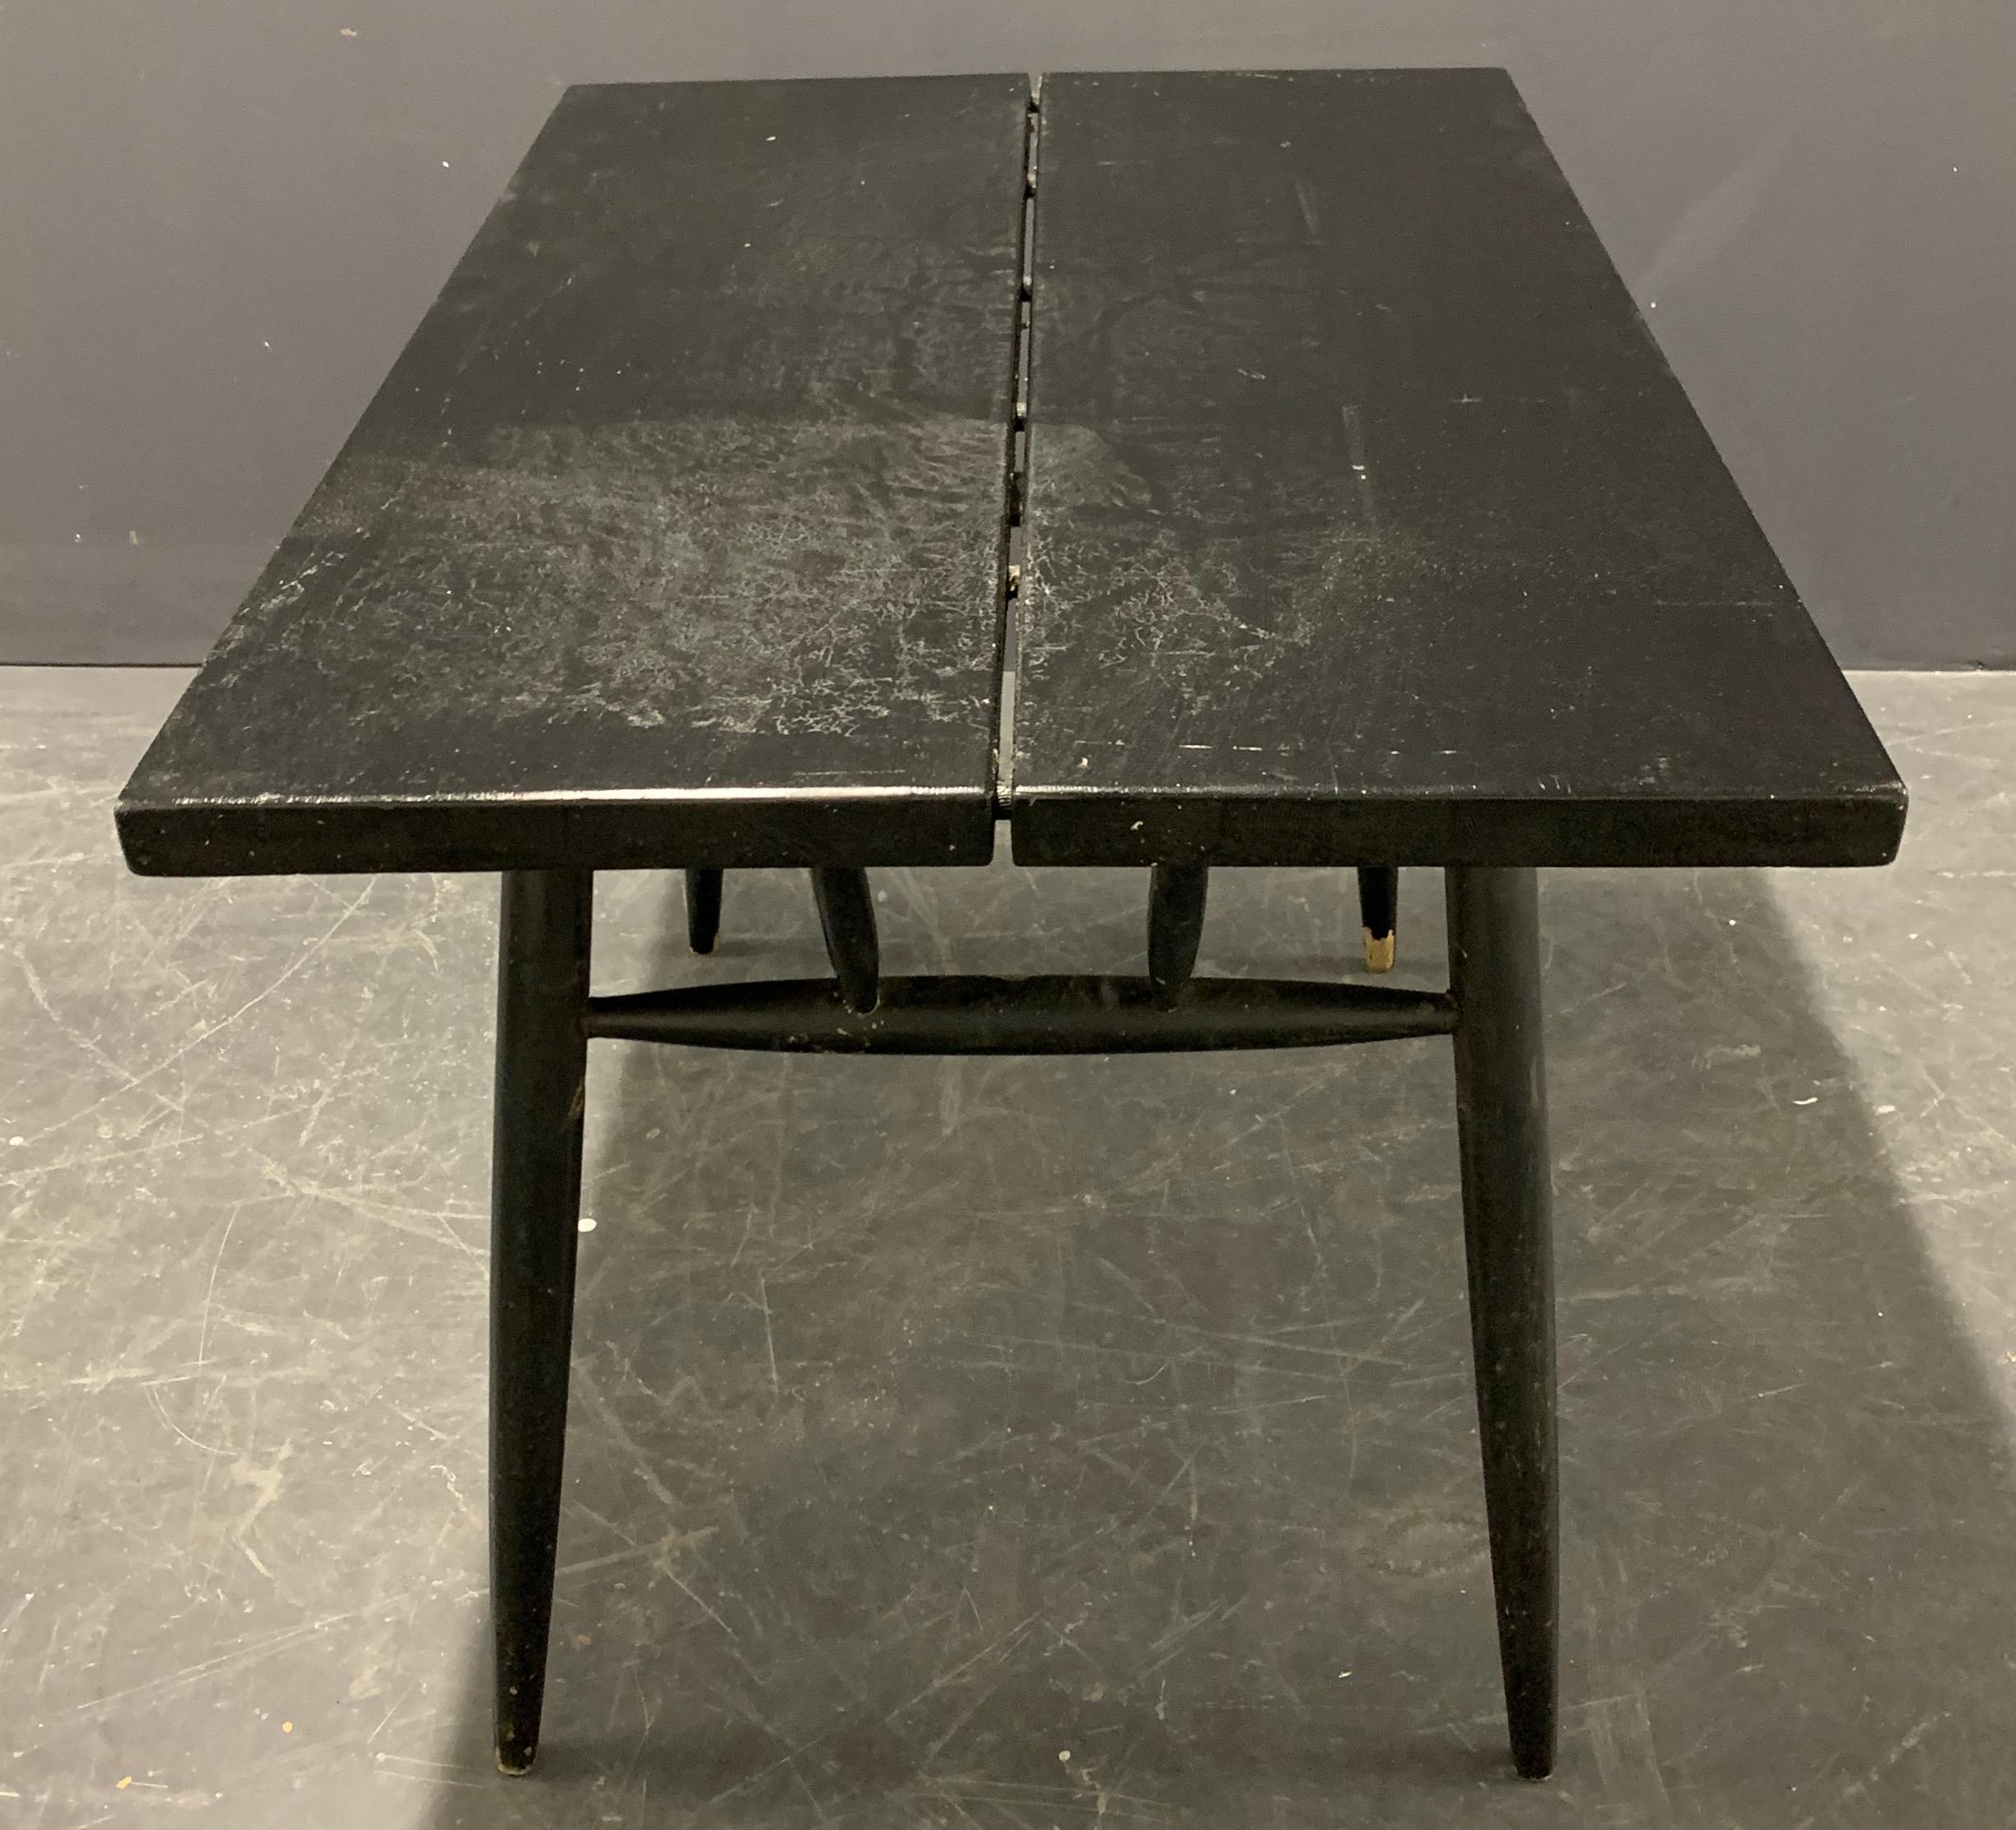 Very early version in rough, worn and later painted condition. Can be used as is or be restored to like new condition as this table is an rare example of a massive wood design piece.